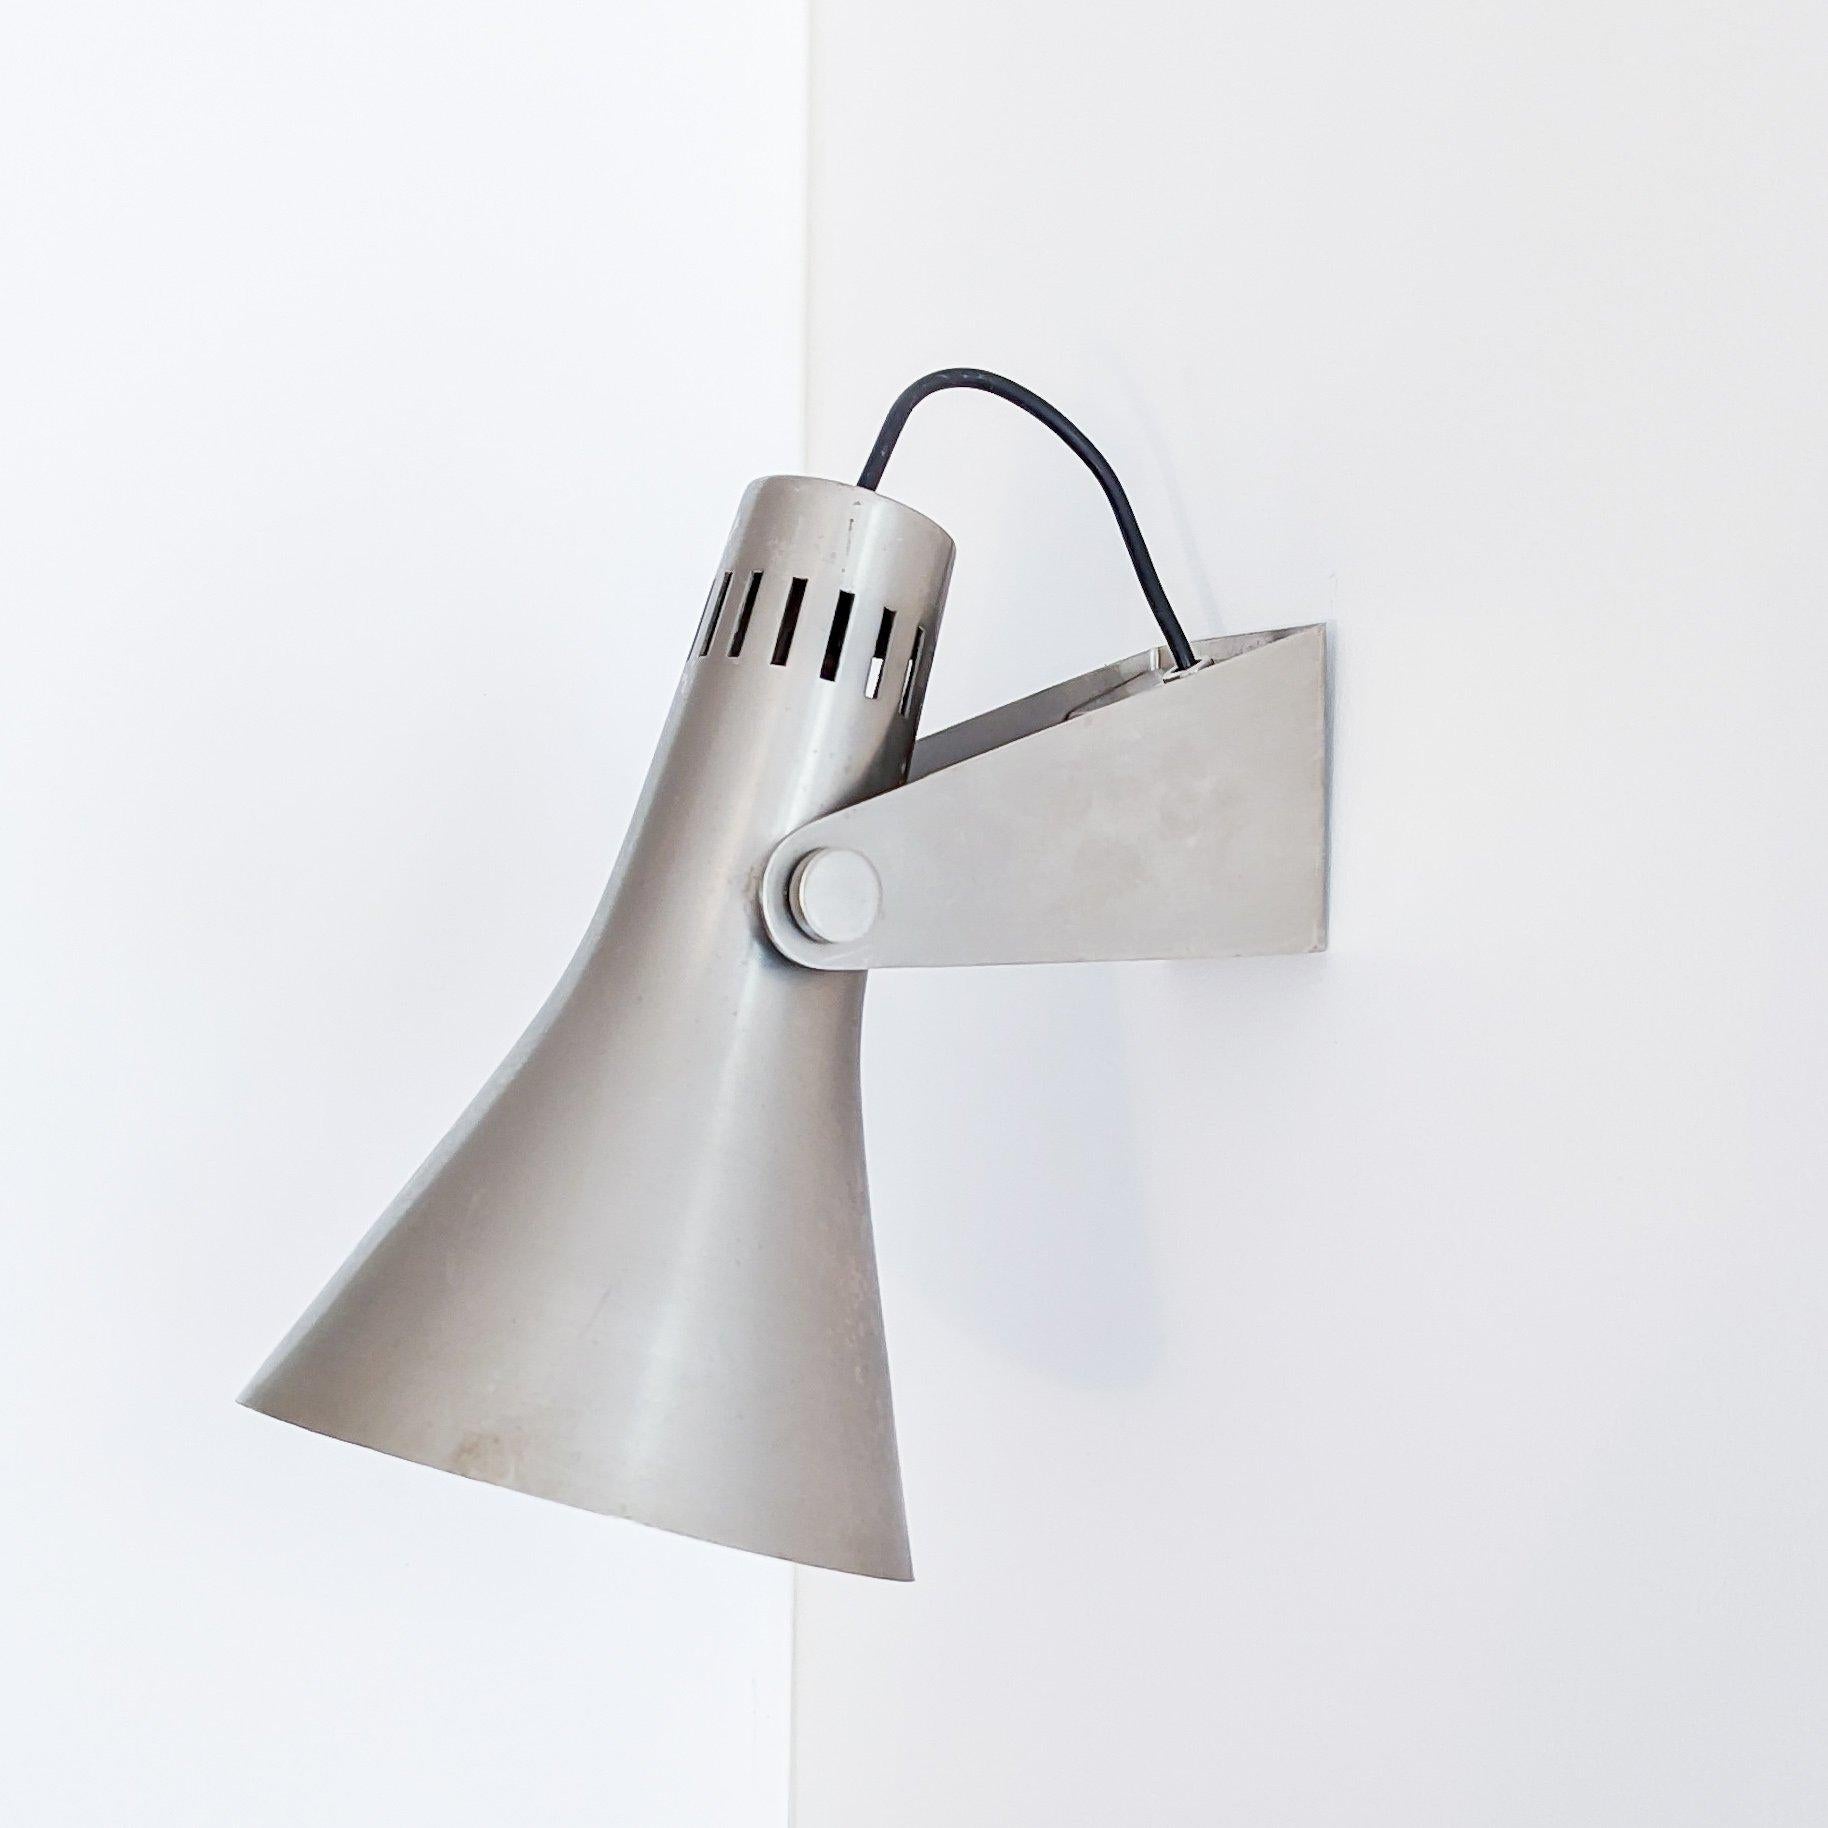 The B3 sconce lamp beautifully exemplifies french artist and designer René-Jean Caillette's craftsmanship, focus on simplicity and material innovation. 

This is a rare exemple in his original condition.